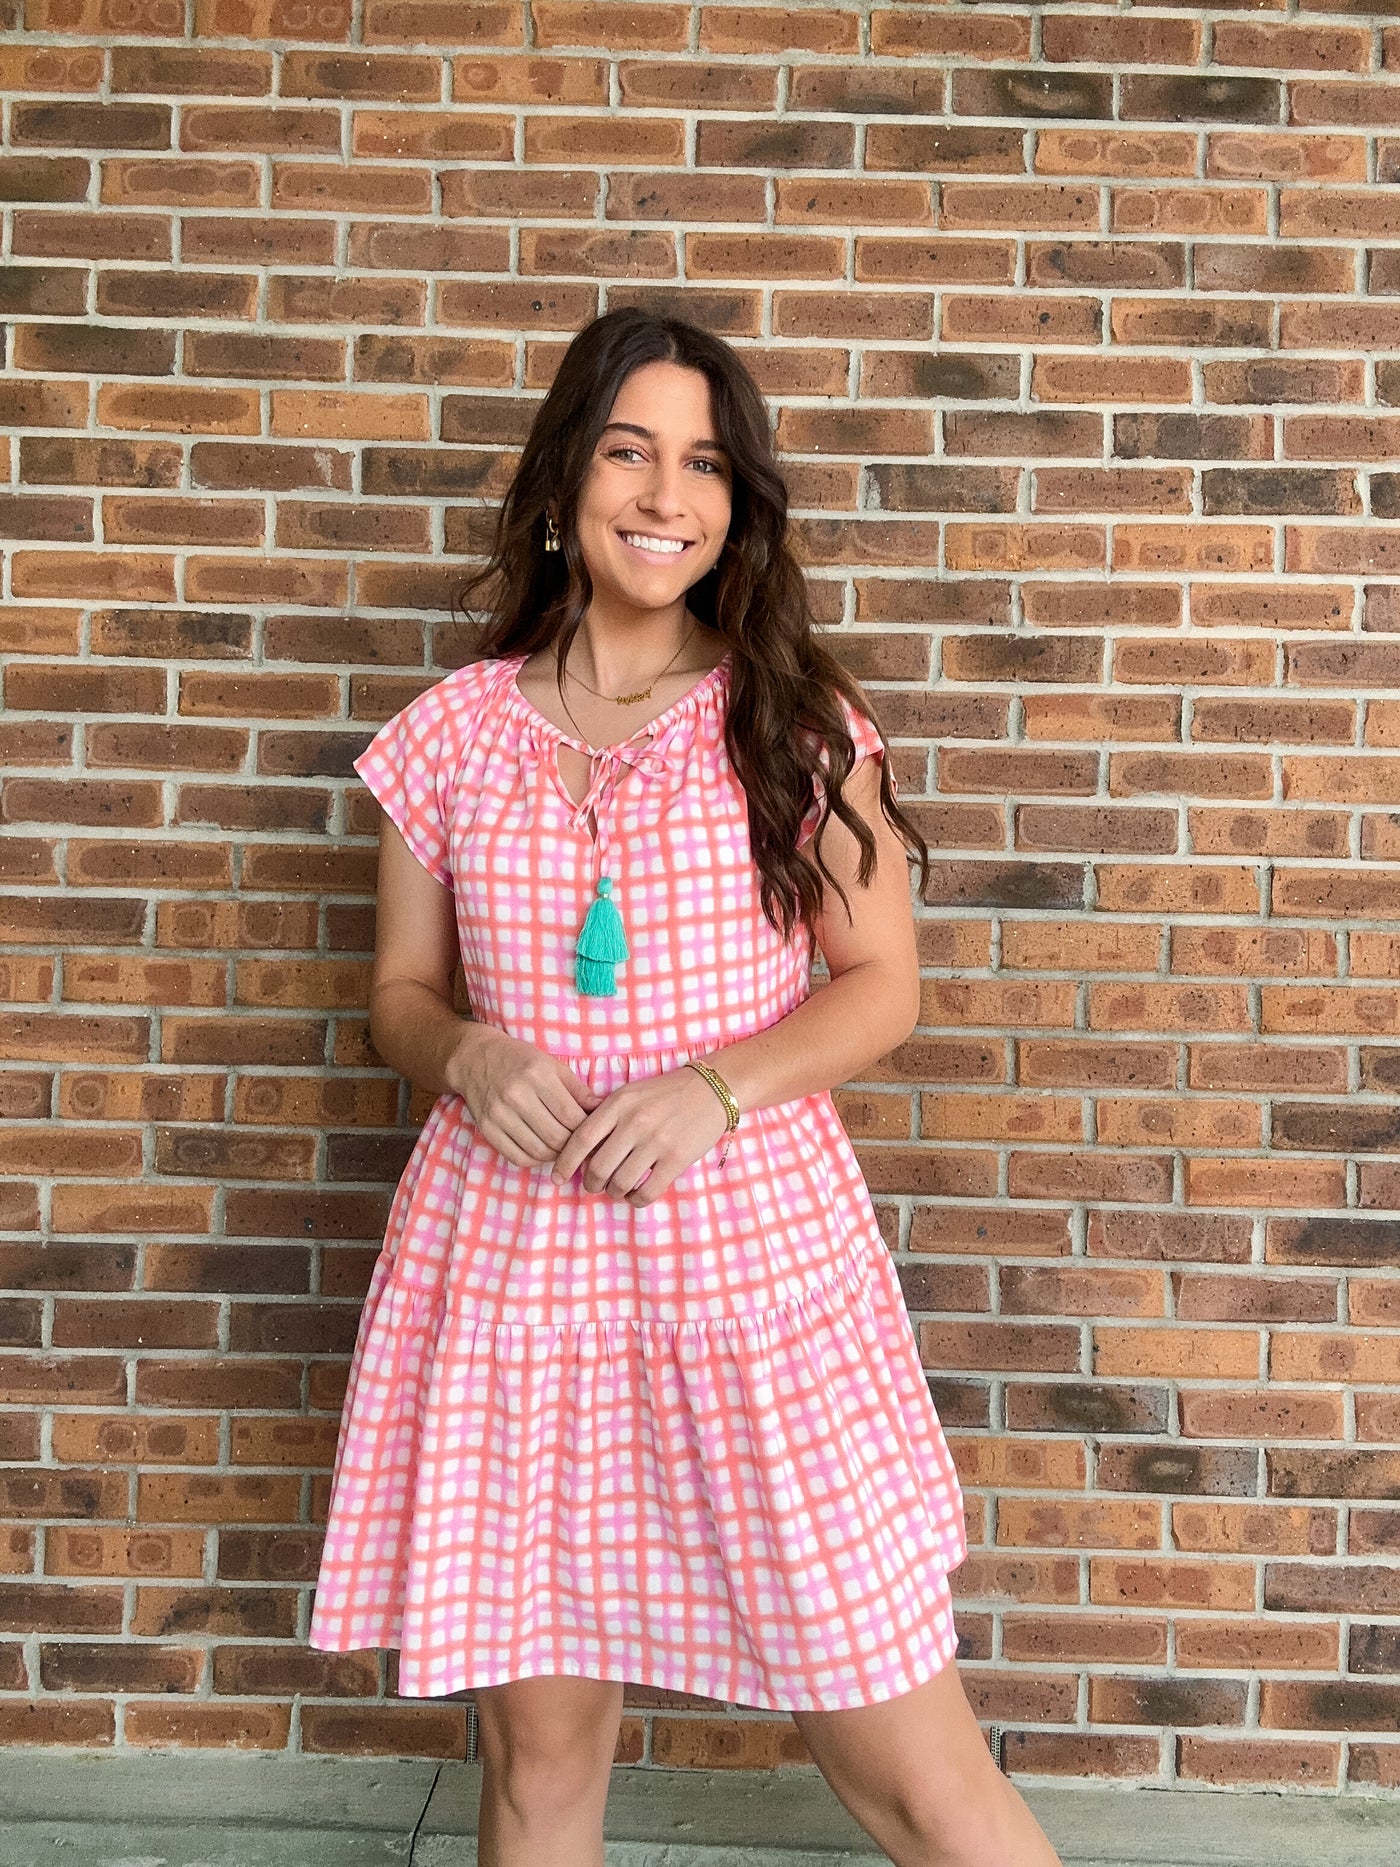 Tiered Gingham Pattern Dress